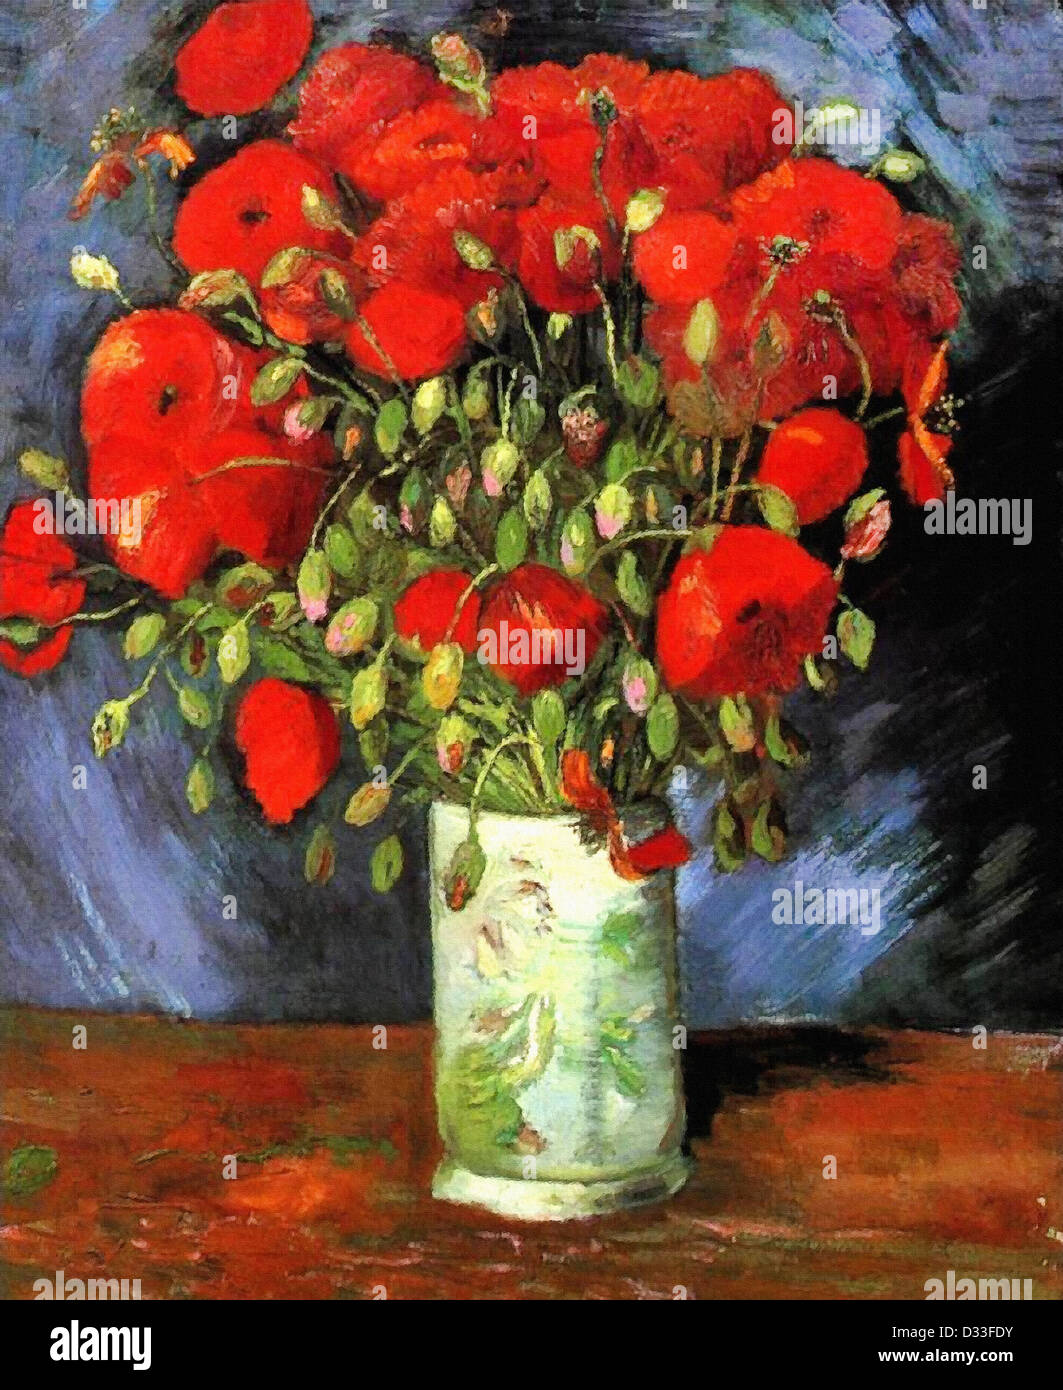 Vincent van Gogh: Vase with Red Poppies. 1886. Oil on canvas. Wadsworth Atheneum, Hartford, CT, USA. Post-Impressionism. Stock Photo